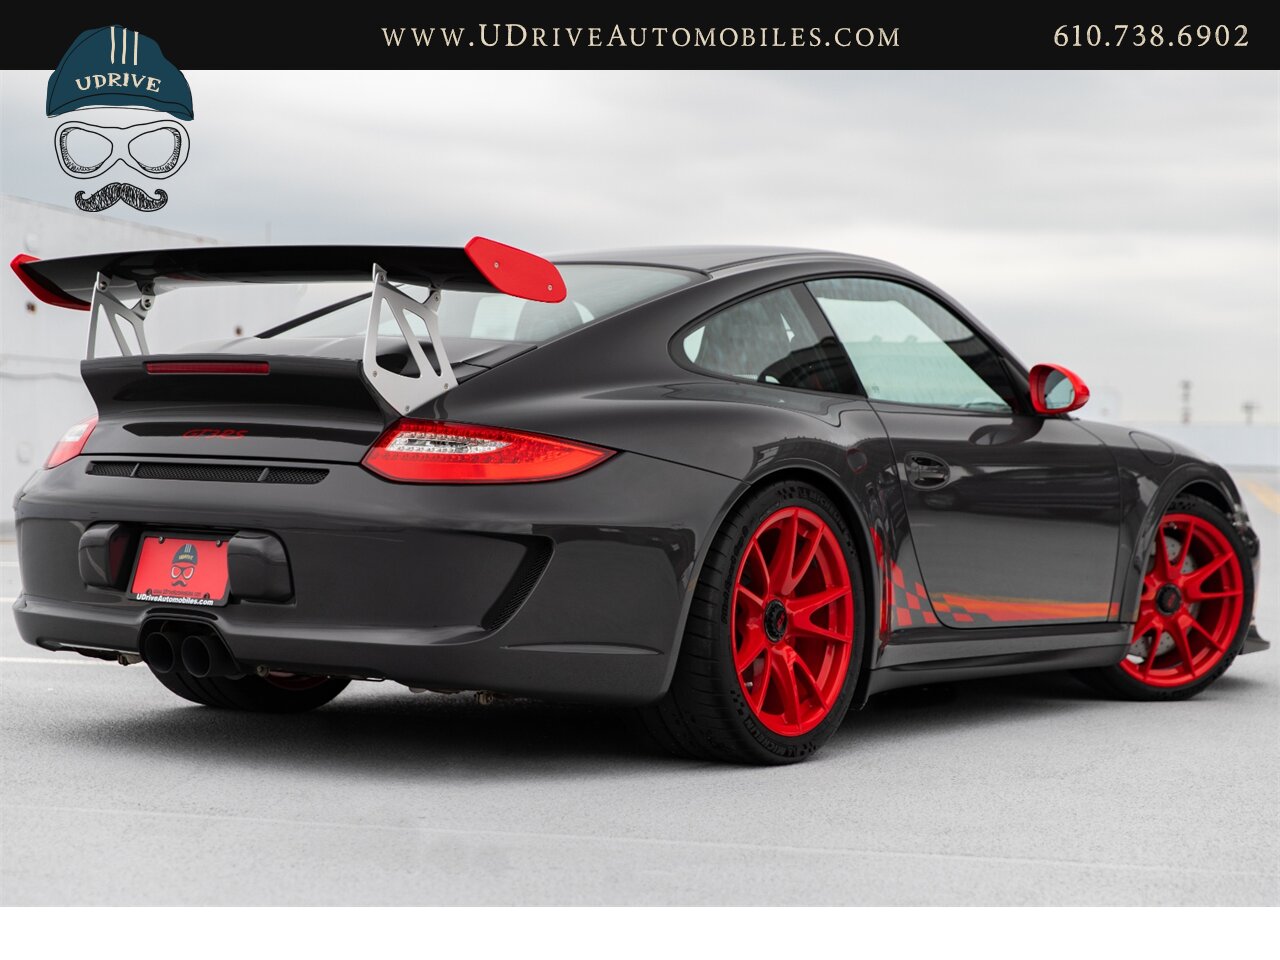 2010 Porsche 911 GT3 RS 1k Miles Dev Red Stitching Throughout  Front Axle Lift Sport Chrono 997.2 - Photo 4 - West Chester, PA 19382